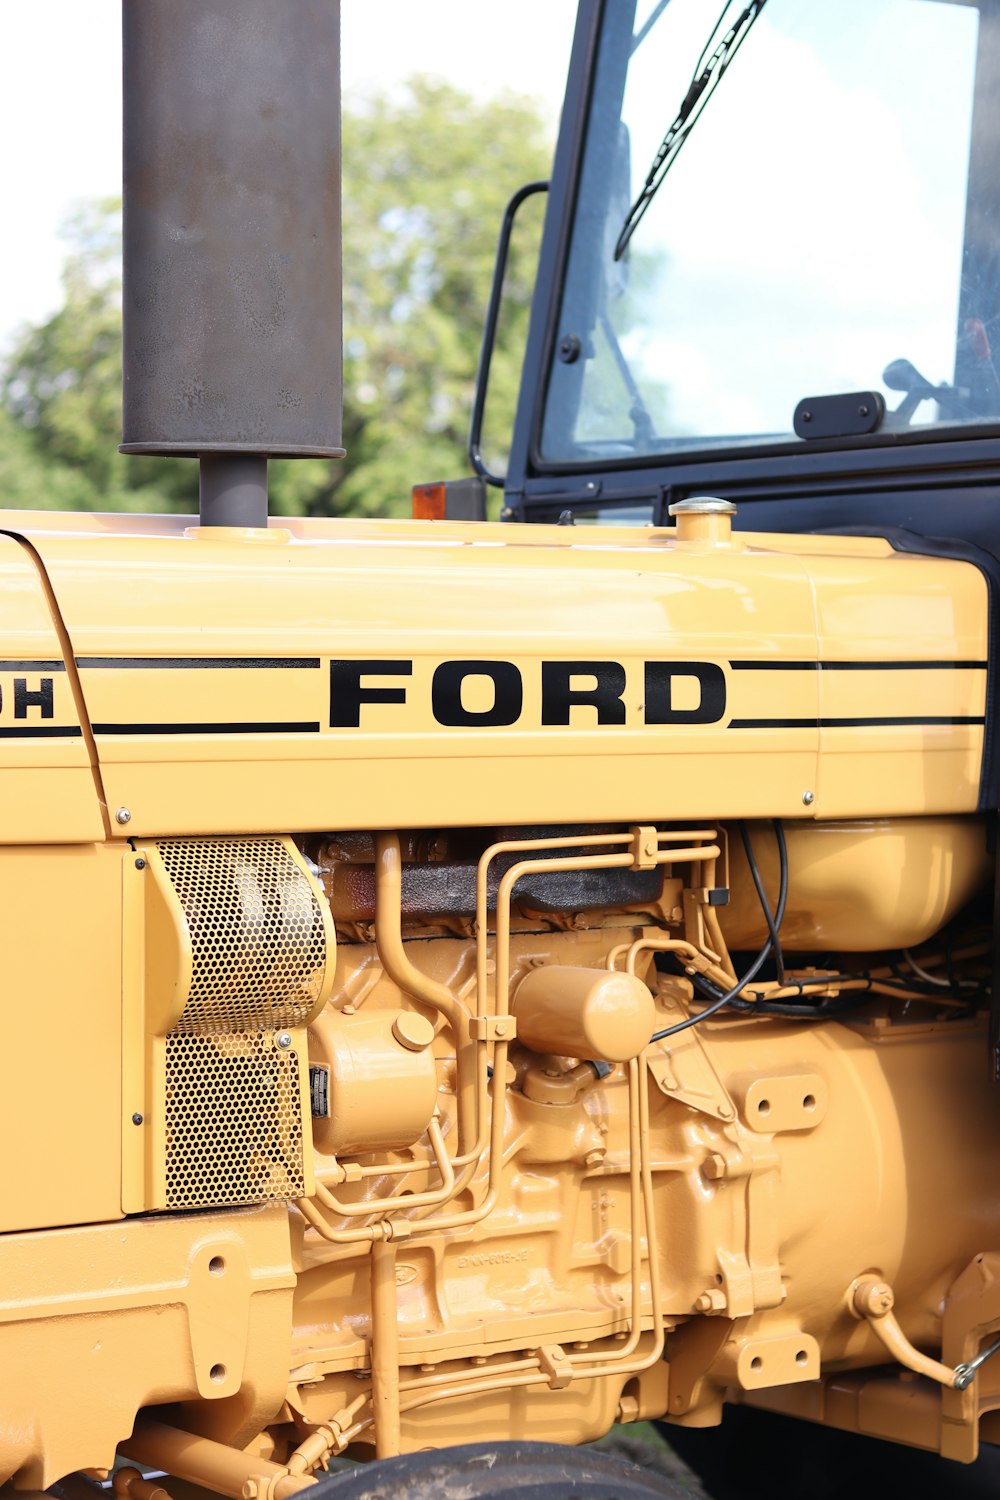 a close up of the front of a yellow tractor